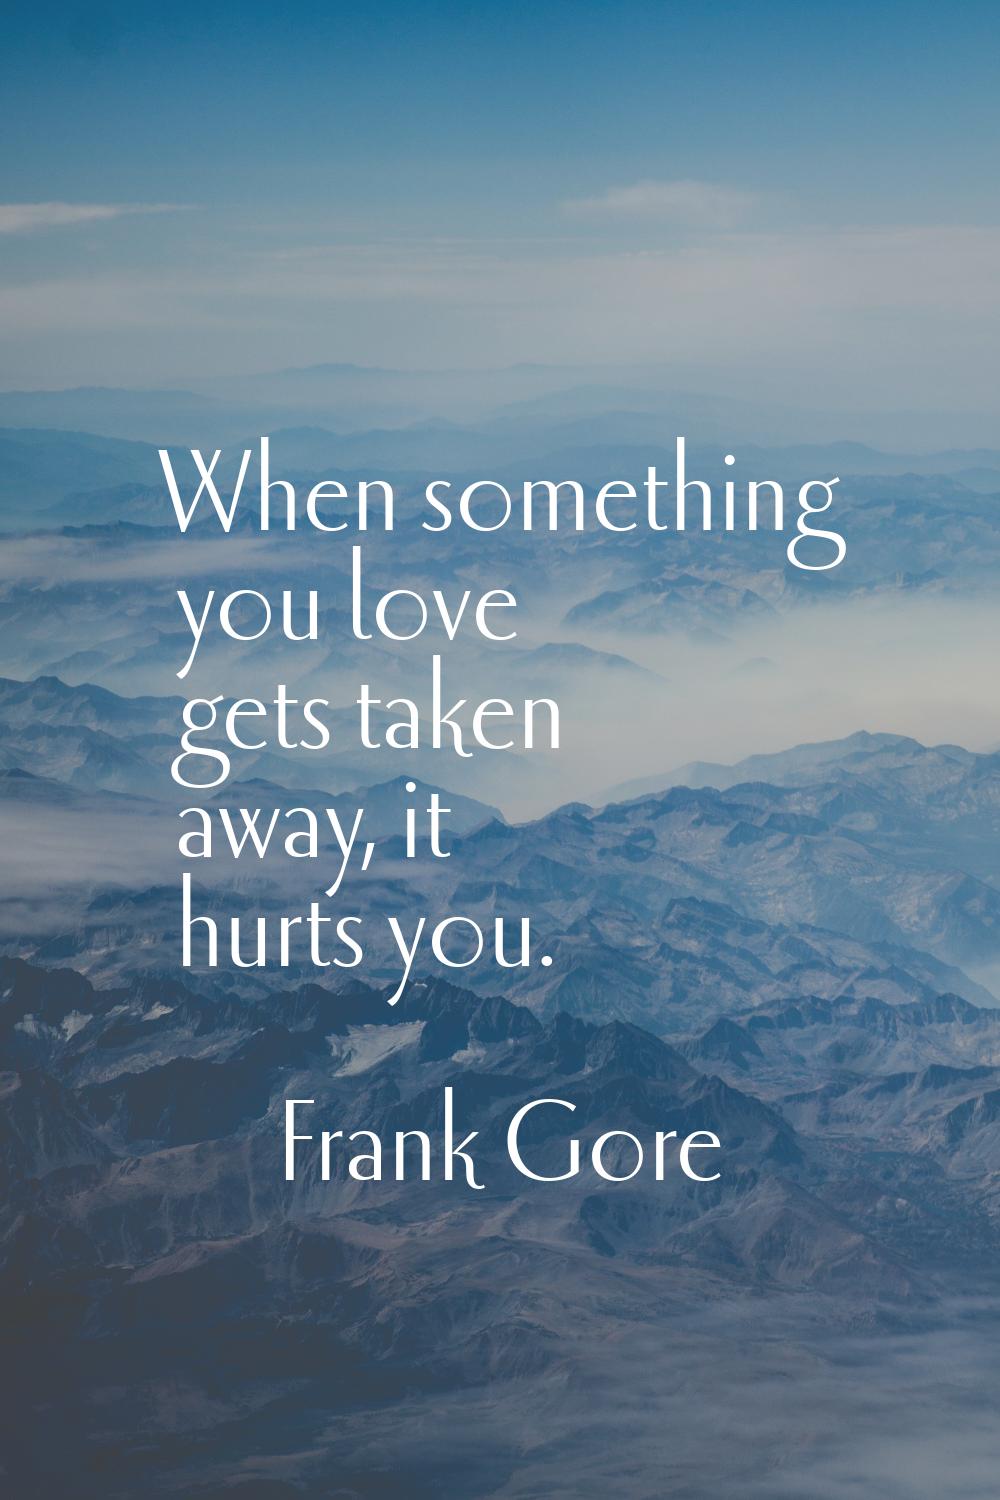 When something you love gets taken away, it hurts you.